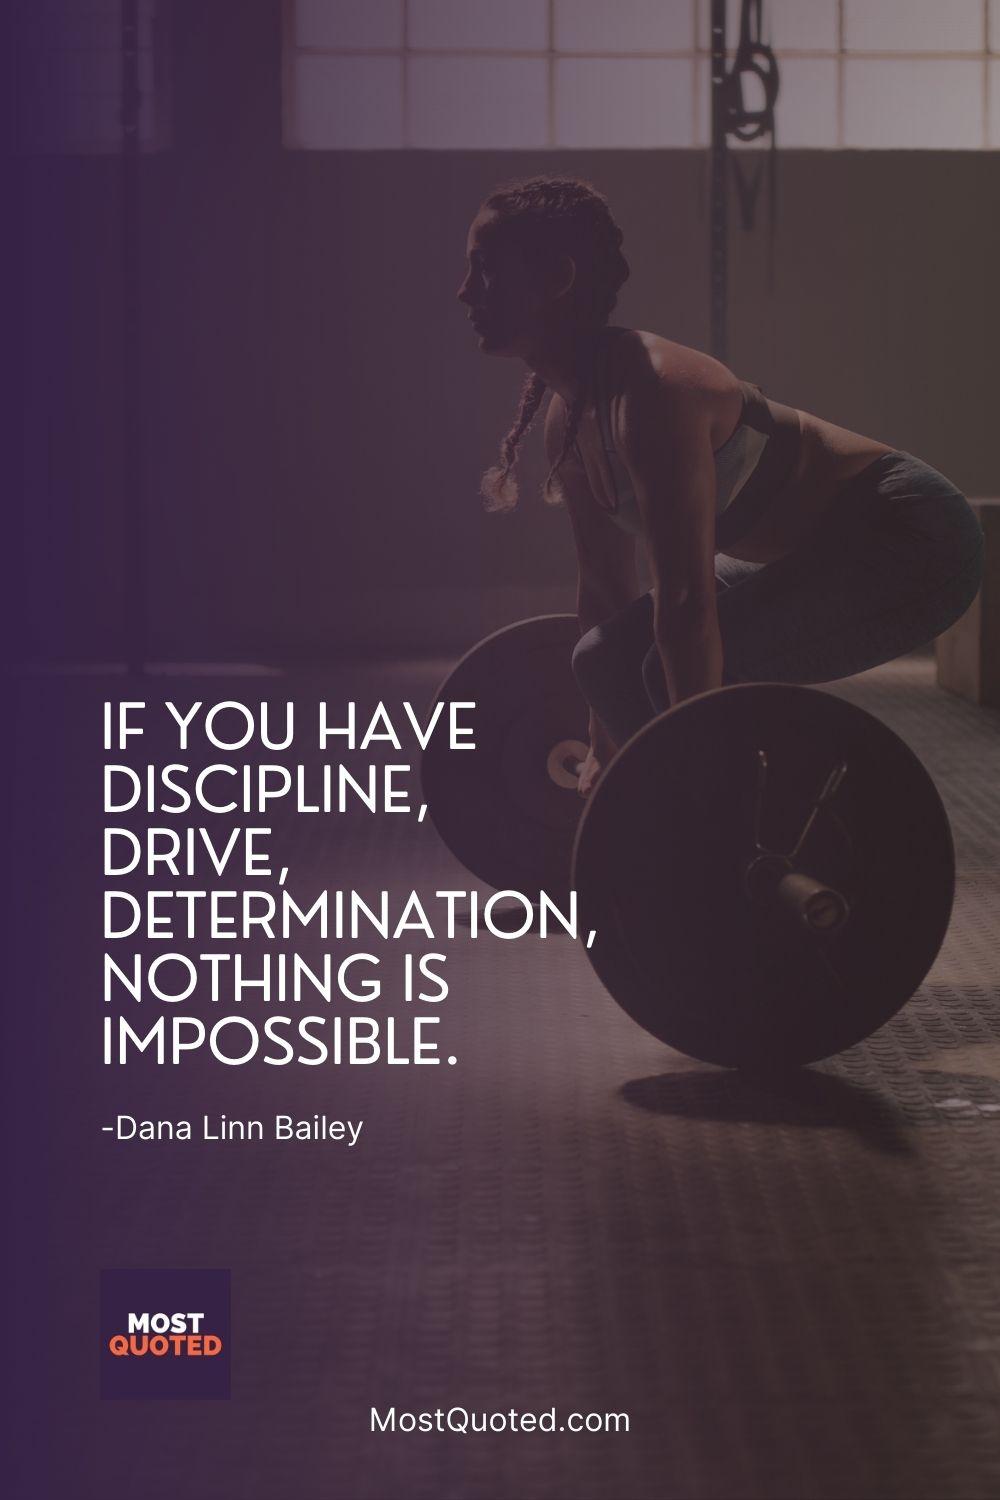 If you have discipline, drive, determination, nothing is impossible.